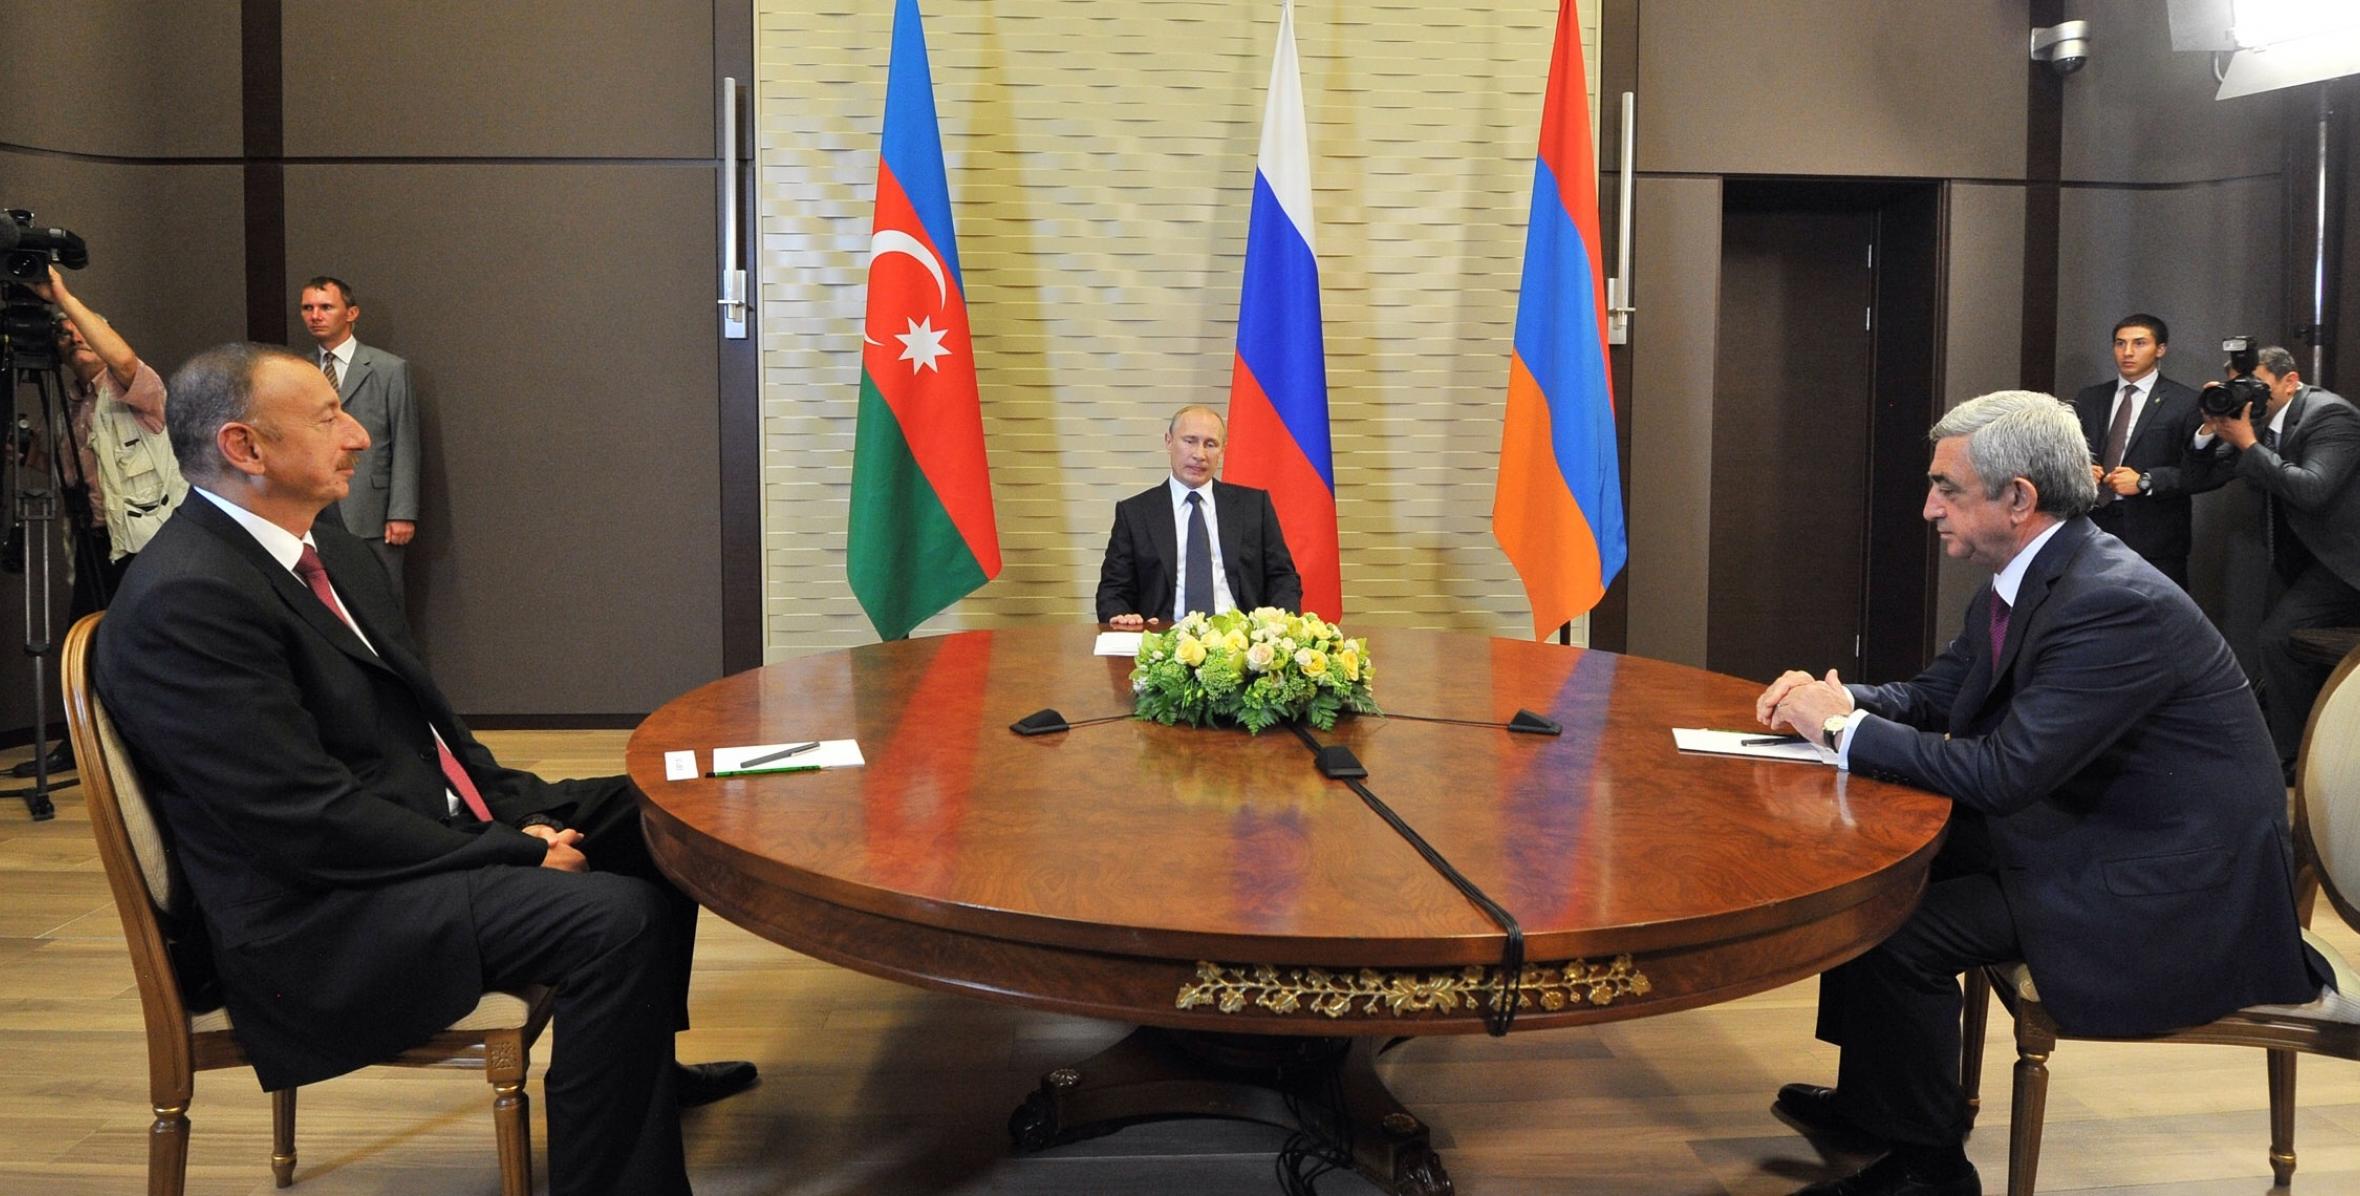 A joint meeting of the Presidents of Azerbaijan, Russia and Armenia was held in Sochi